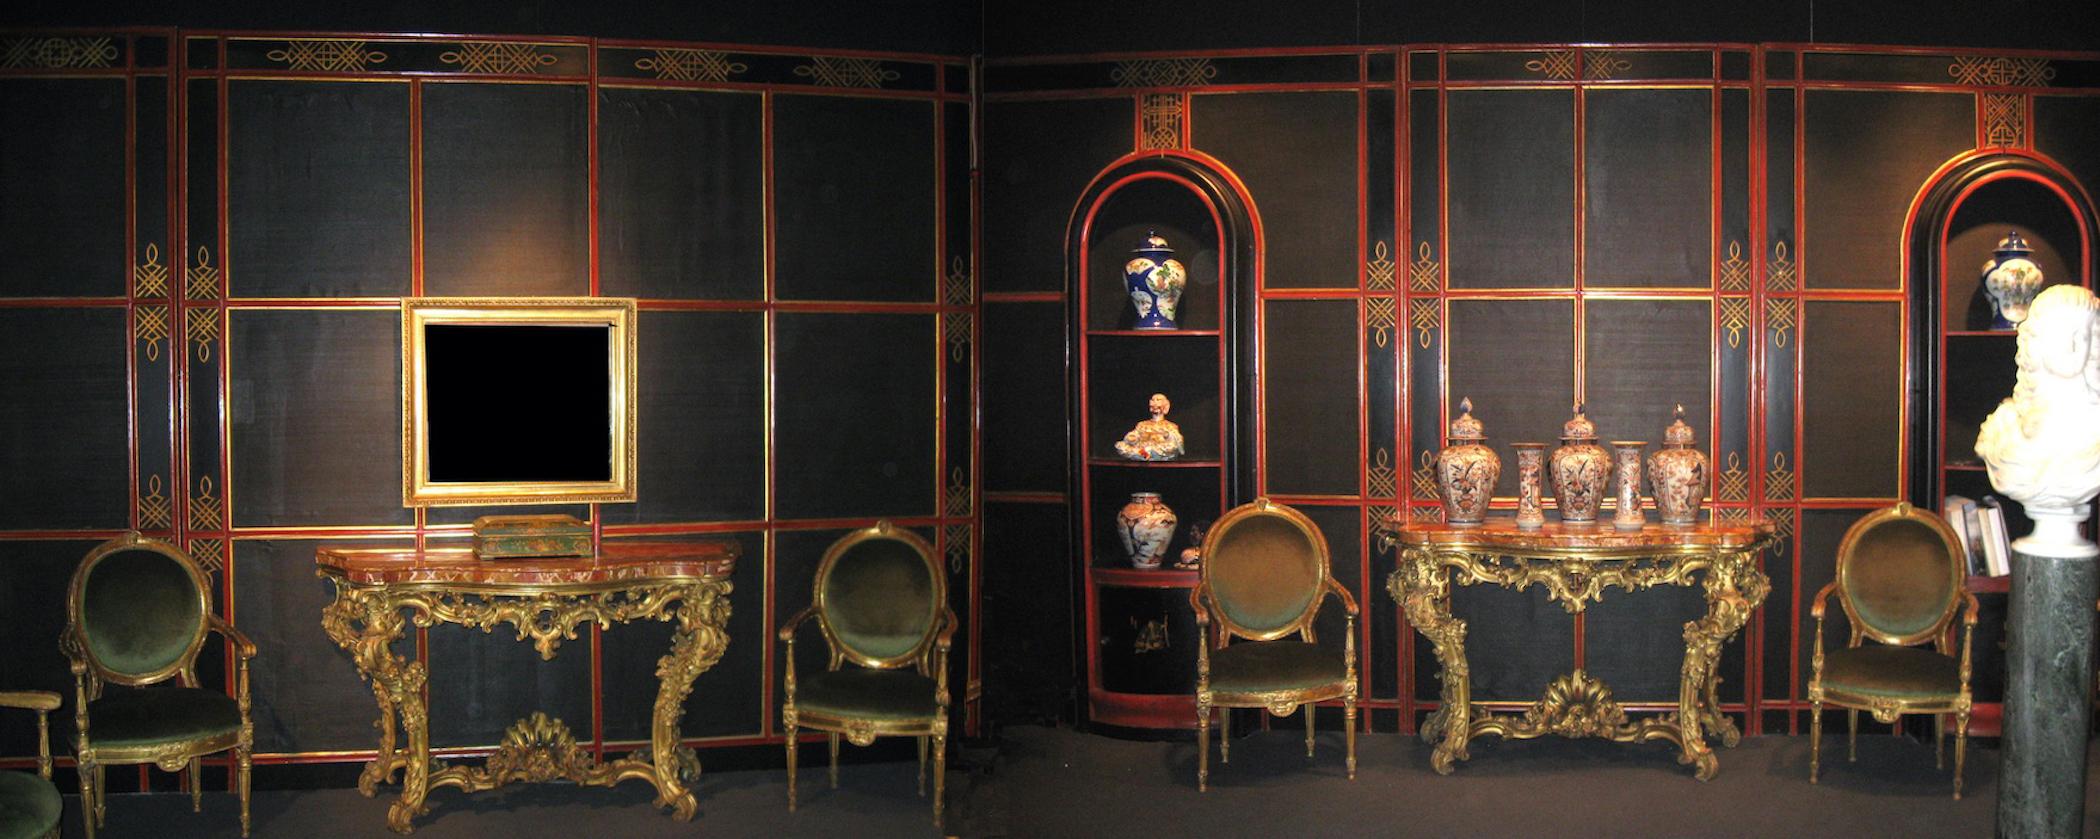 A very fine early 20th century Italian “japoneserie” painted and parcel-gilt Boiserie panels with a black painted canvas insert.
Modular panels create a complete room with an amazing door and a pair of fine book cases or cabinets.
Sophisticated